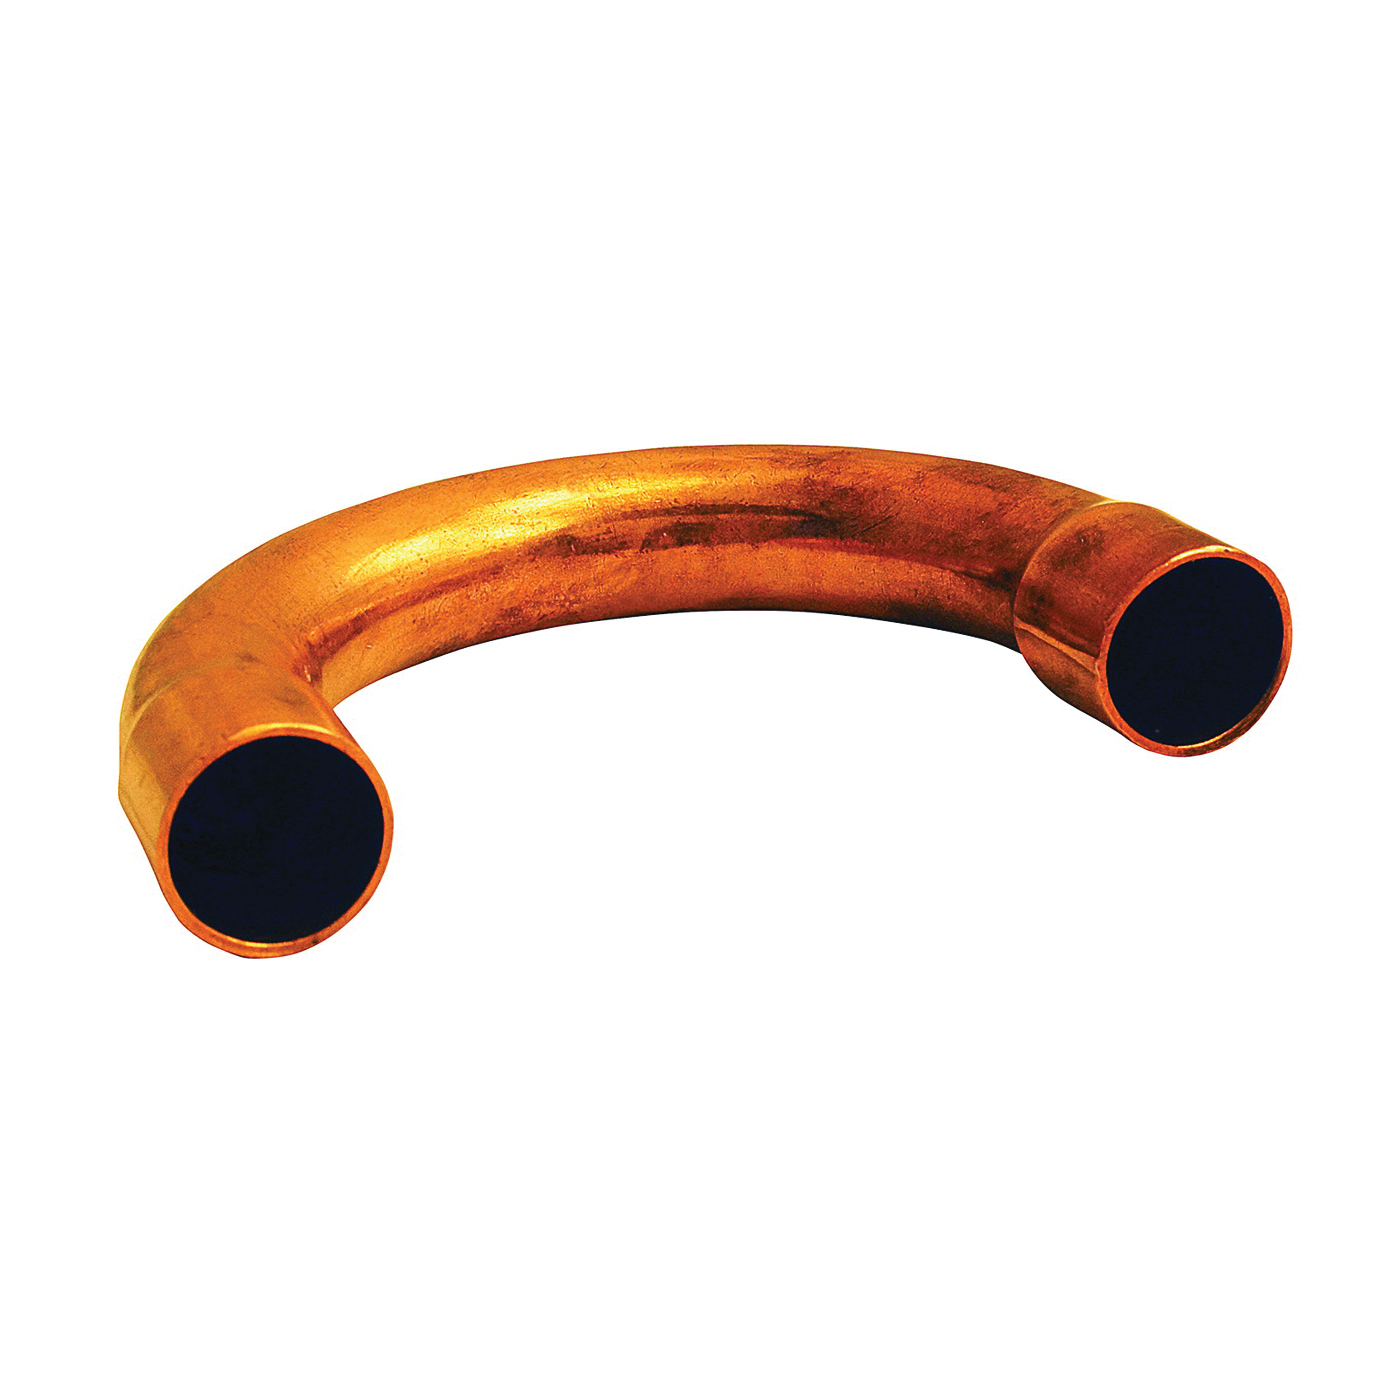 Elkhart Products 10132364 Return Pipe Bend, 3/4 in - 1